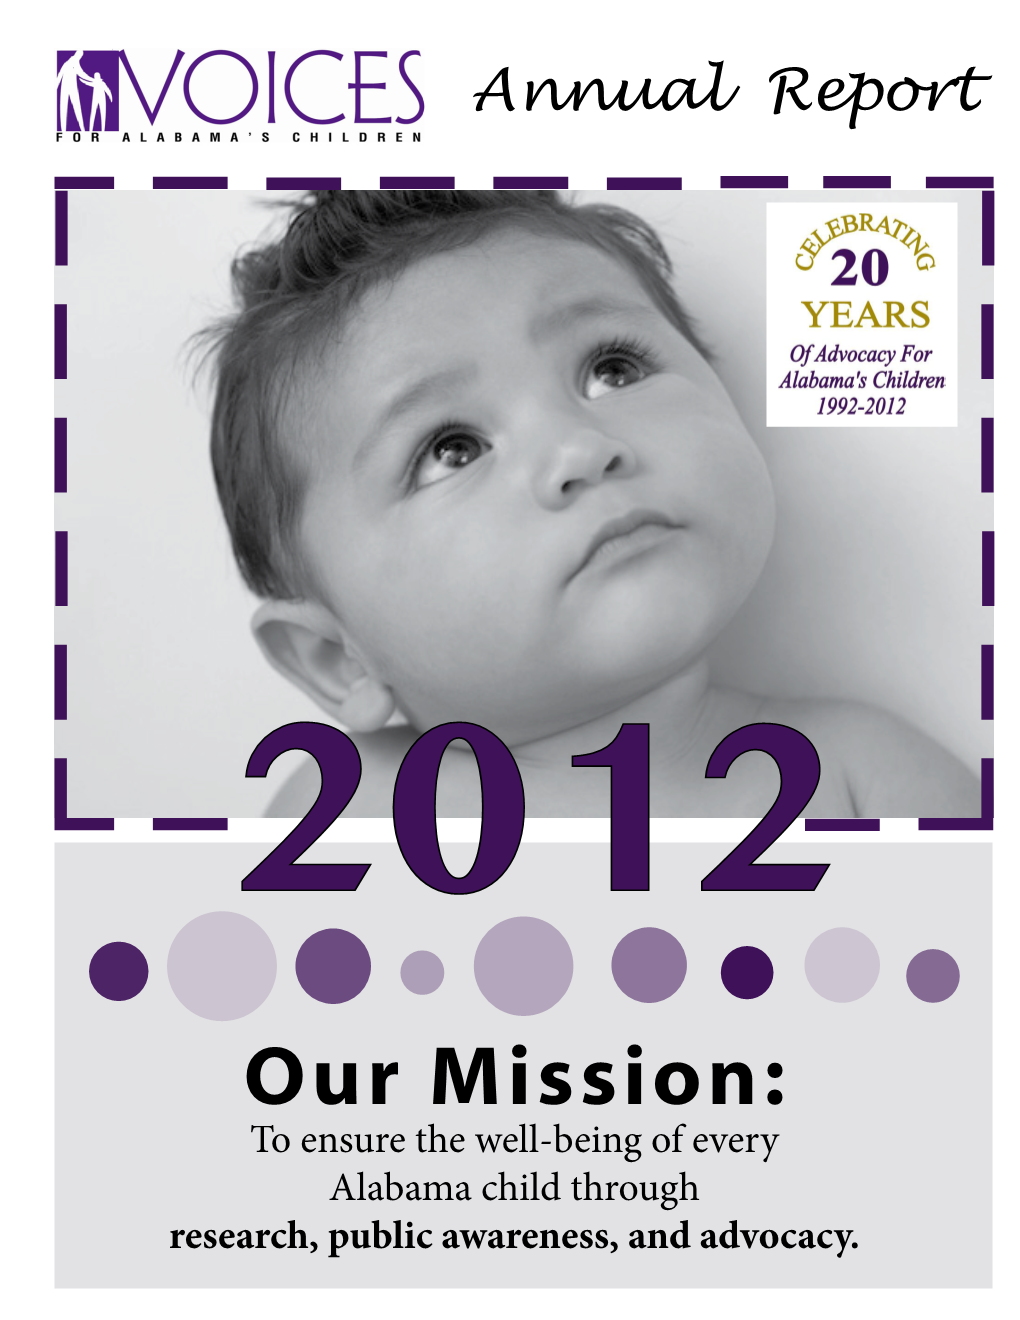 Our Mission: to Ensure the Well-Being of Every Alabama Child Through Research, Public Awareness, and Advocacy